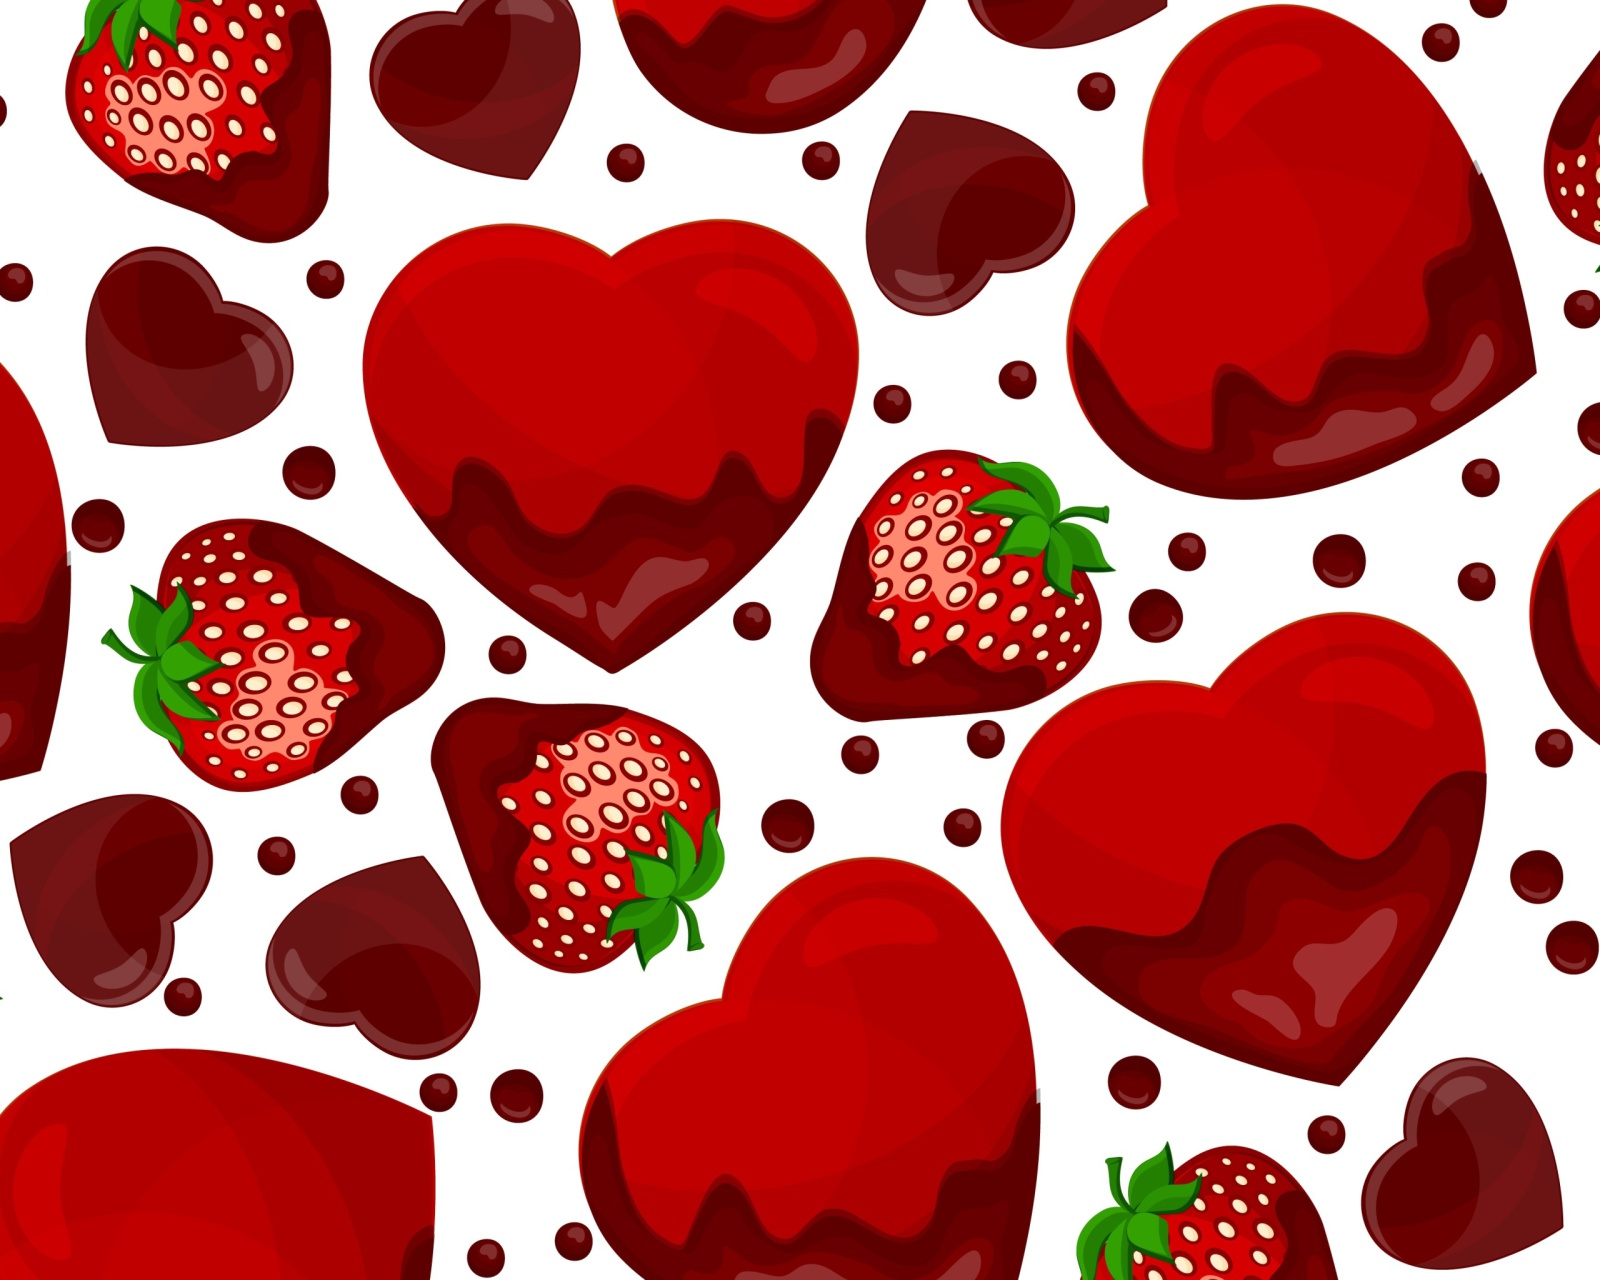 Strawberry and Hearts wallpaper 1600x1280